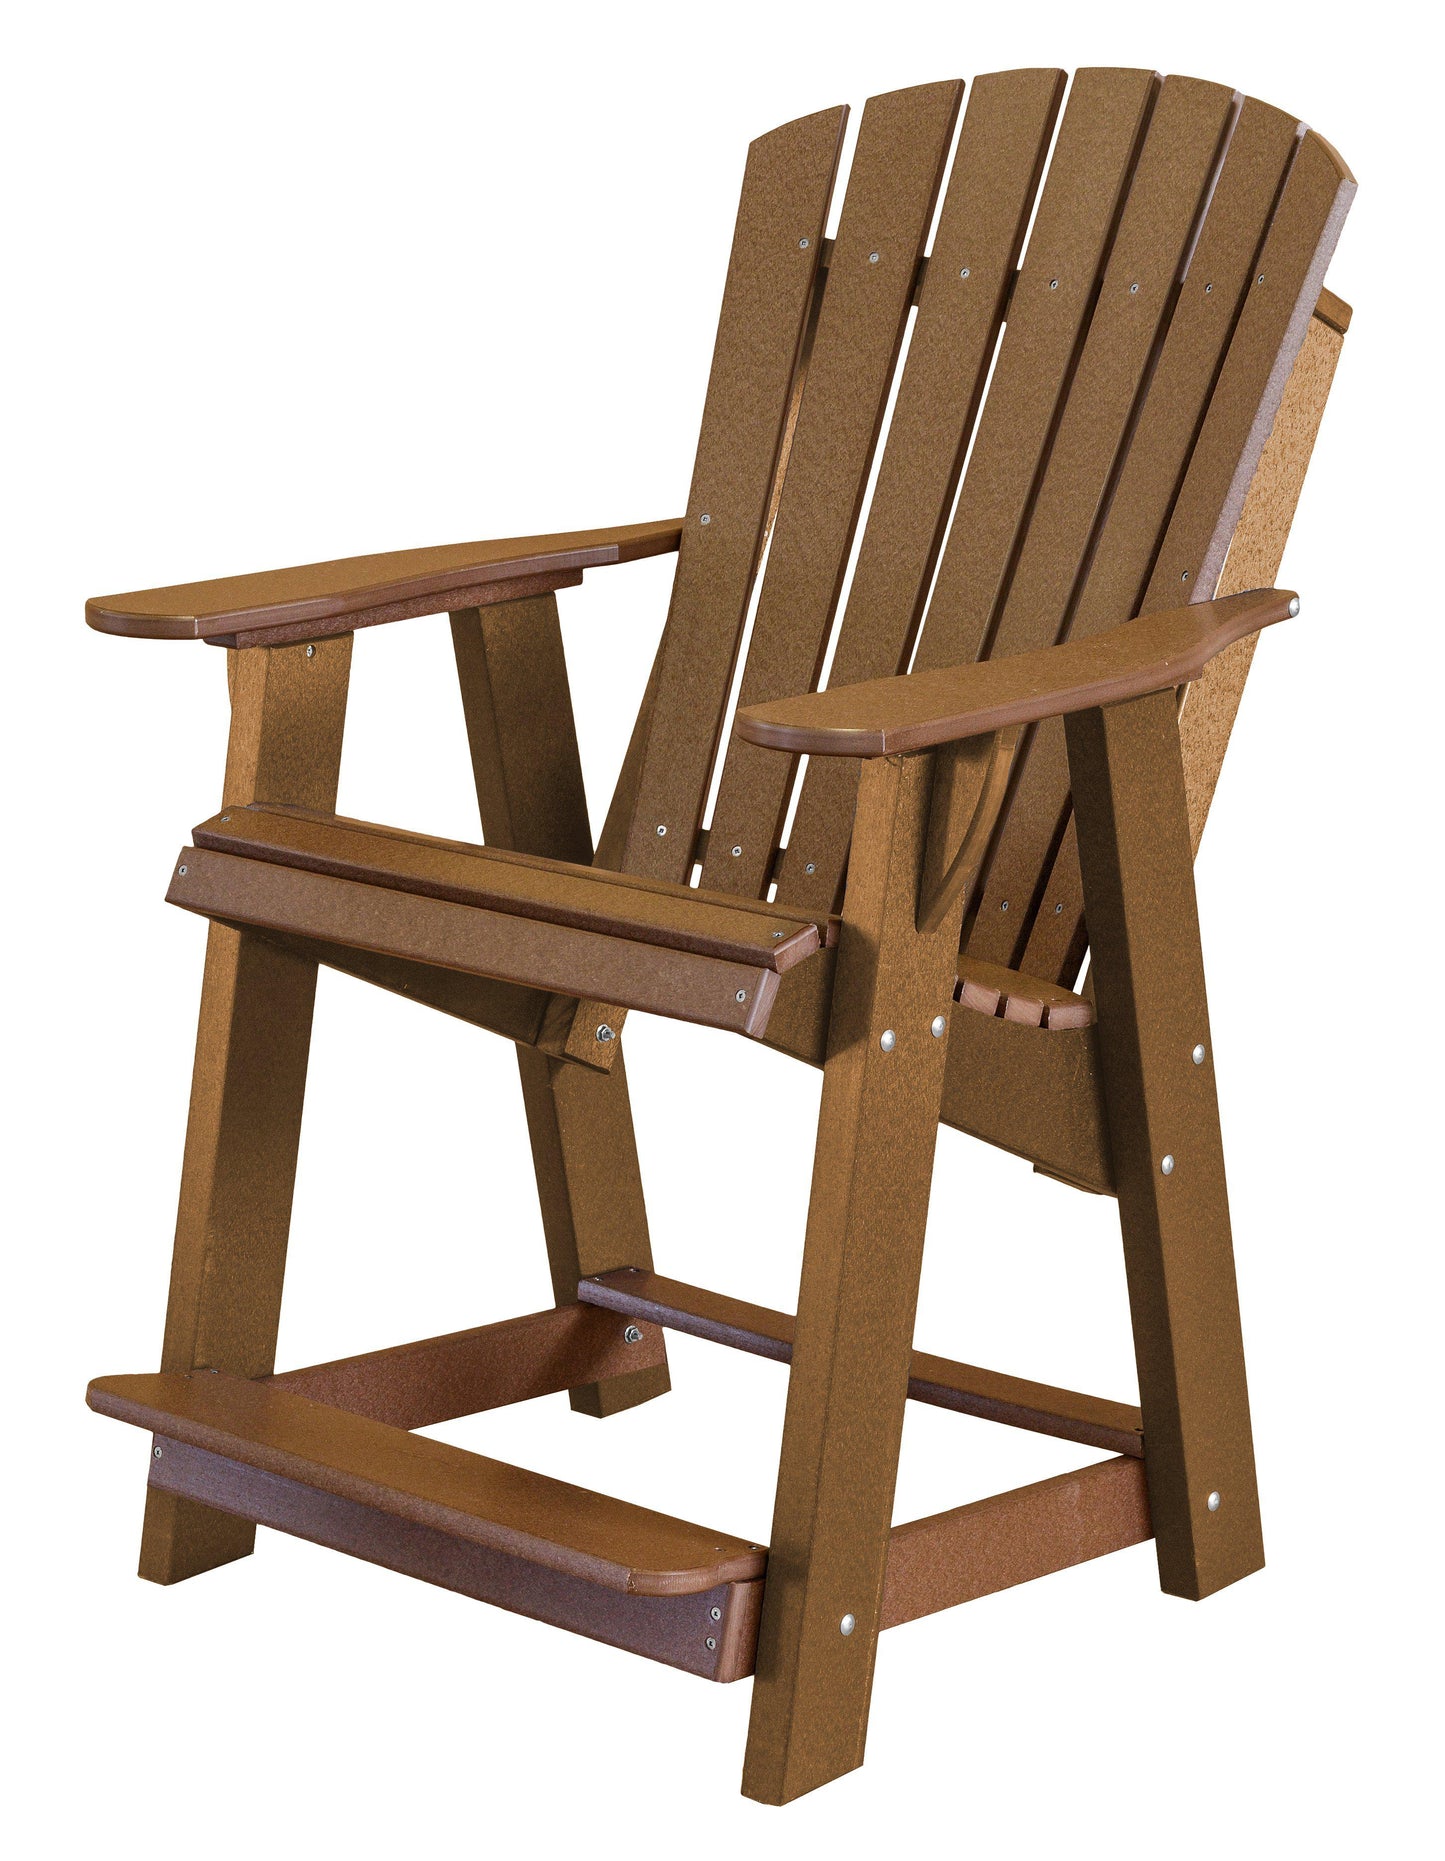 WILDRIDGE RECYCLED PLASTIC HERITAGE HIGH ADIRONDACK CHAIR (QUICK SHIP) - LEAD TIME TO SHIP 3 TO 4 BUSINESS DAYS